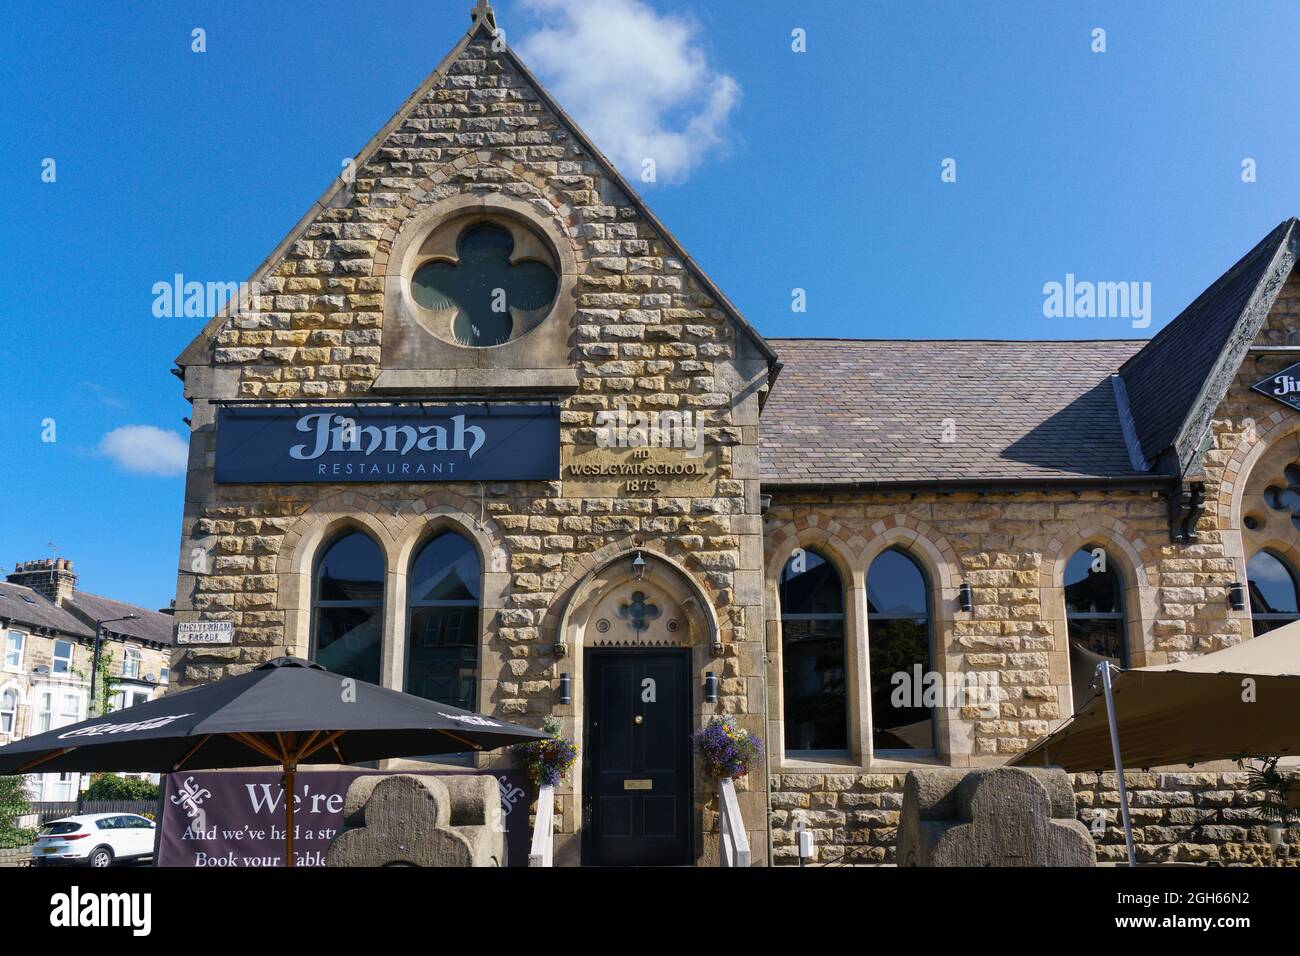 Jinnah Indian Restaurant entrance with stone, brick walls, and vaulted windows, Harrogate, North Yorkshire, Britain, UK. Stock Photo